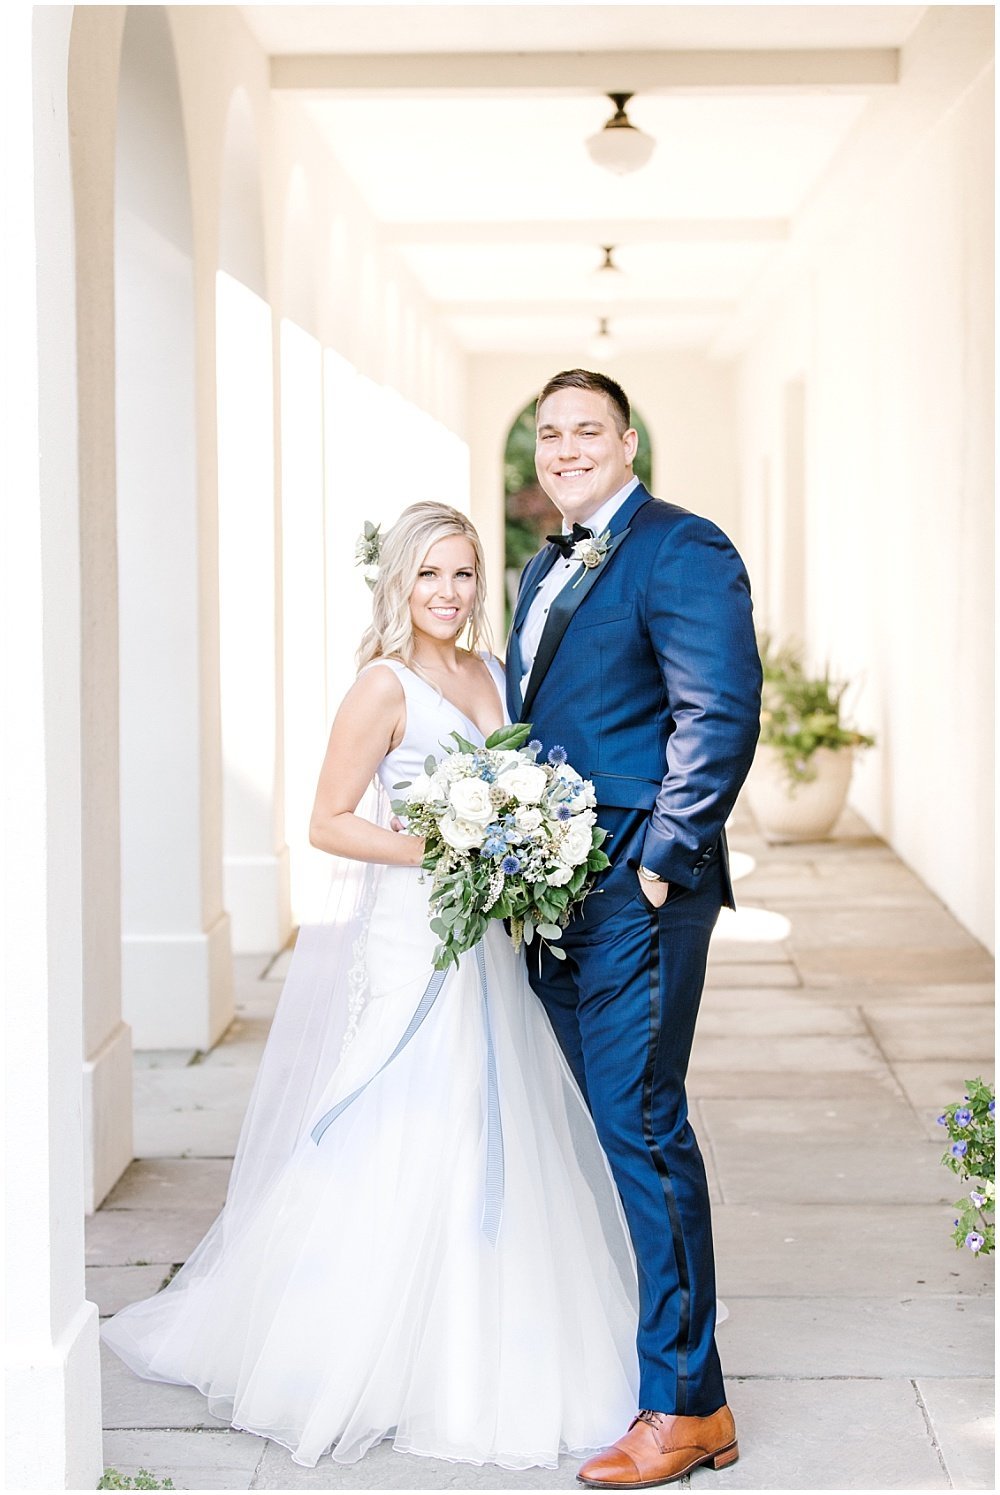 NFL-Player-Nick-Martin-Indianapolis-Indiana-Wedding-The-Knot-Featured-Jessica-Dum-Wedding-Coordination-photo__0008